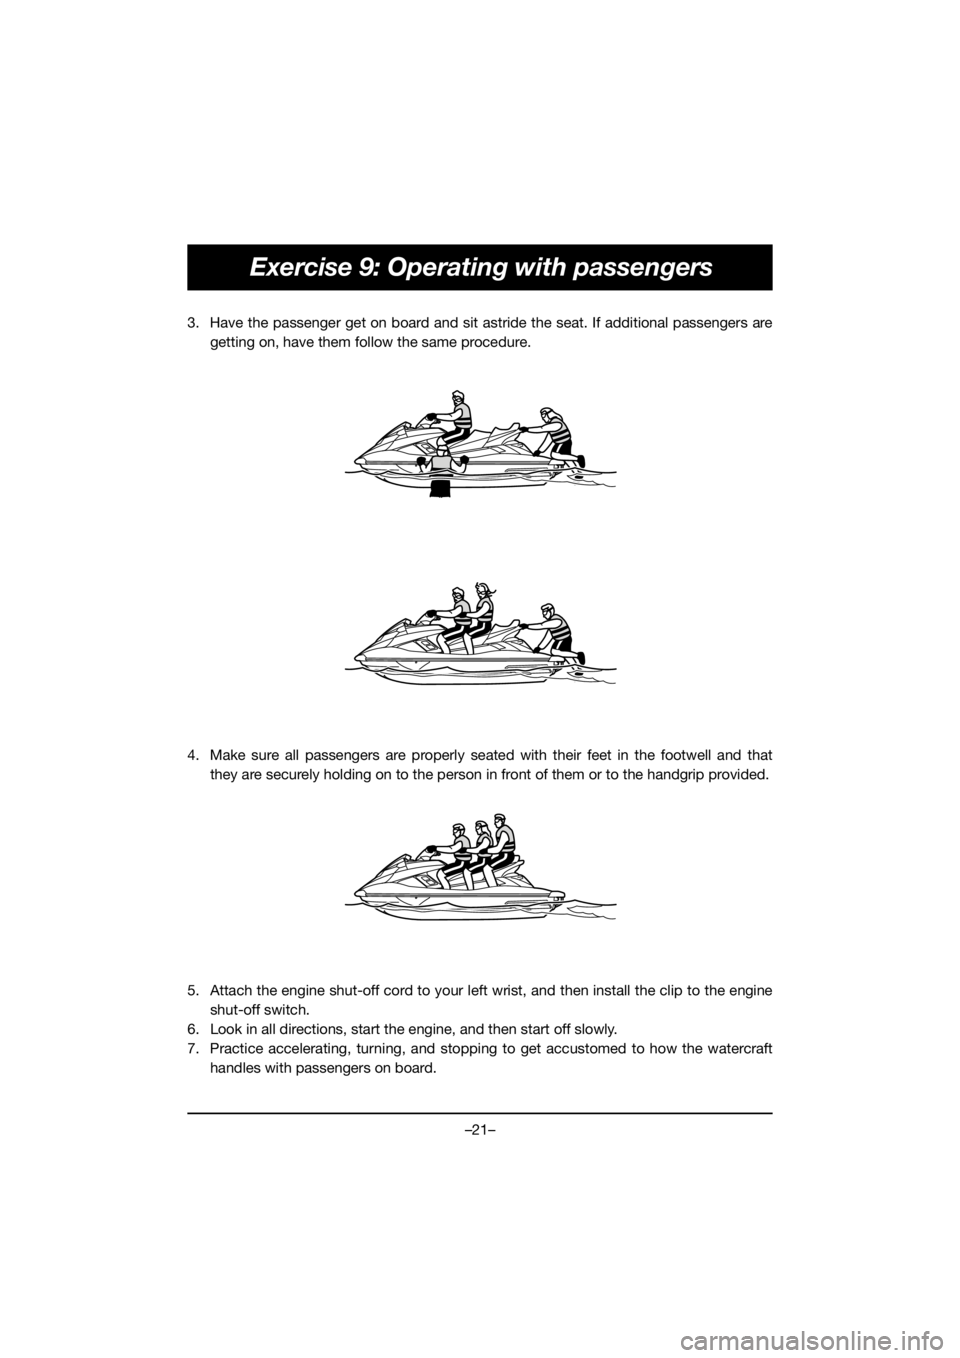 YAMAHA FX HO 2019  Bruksanvisningar (in Swedish) –21–
Exercise 9: Operating with passengers
3. Have the passenger get on board and sit astride the seat. If additional passengers are
getting on, have them follow the same procedure.
4. Make sure a